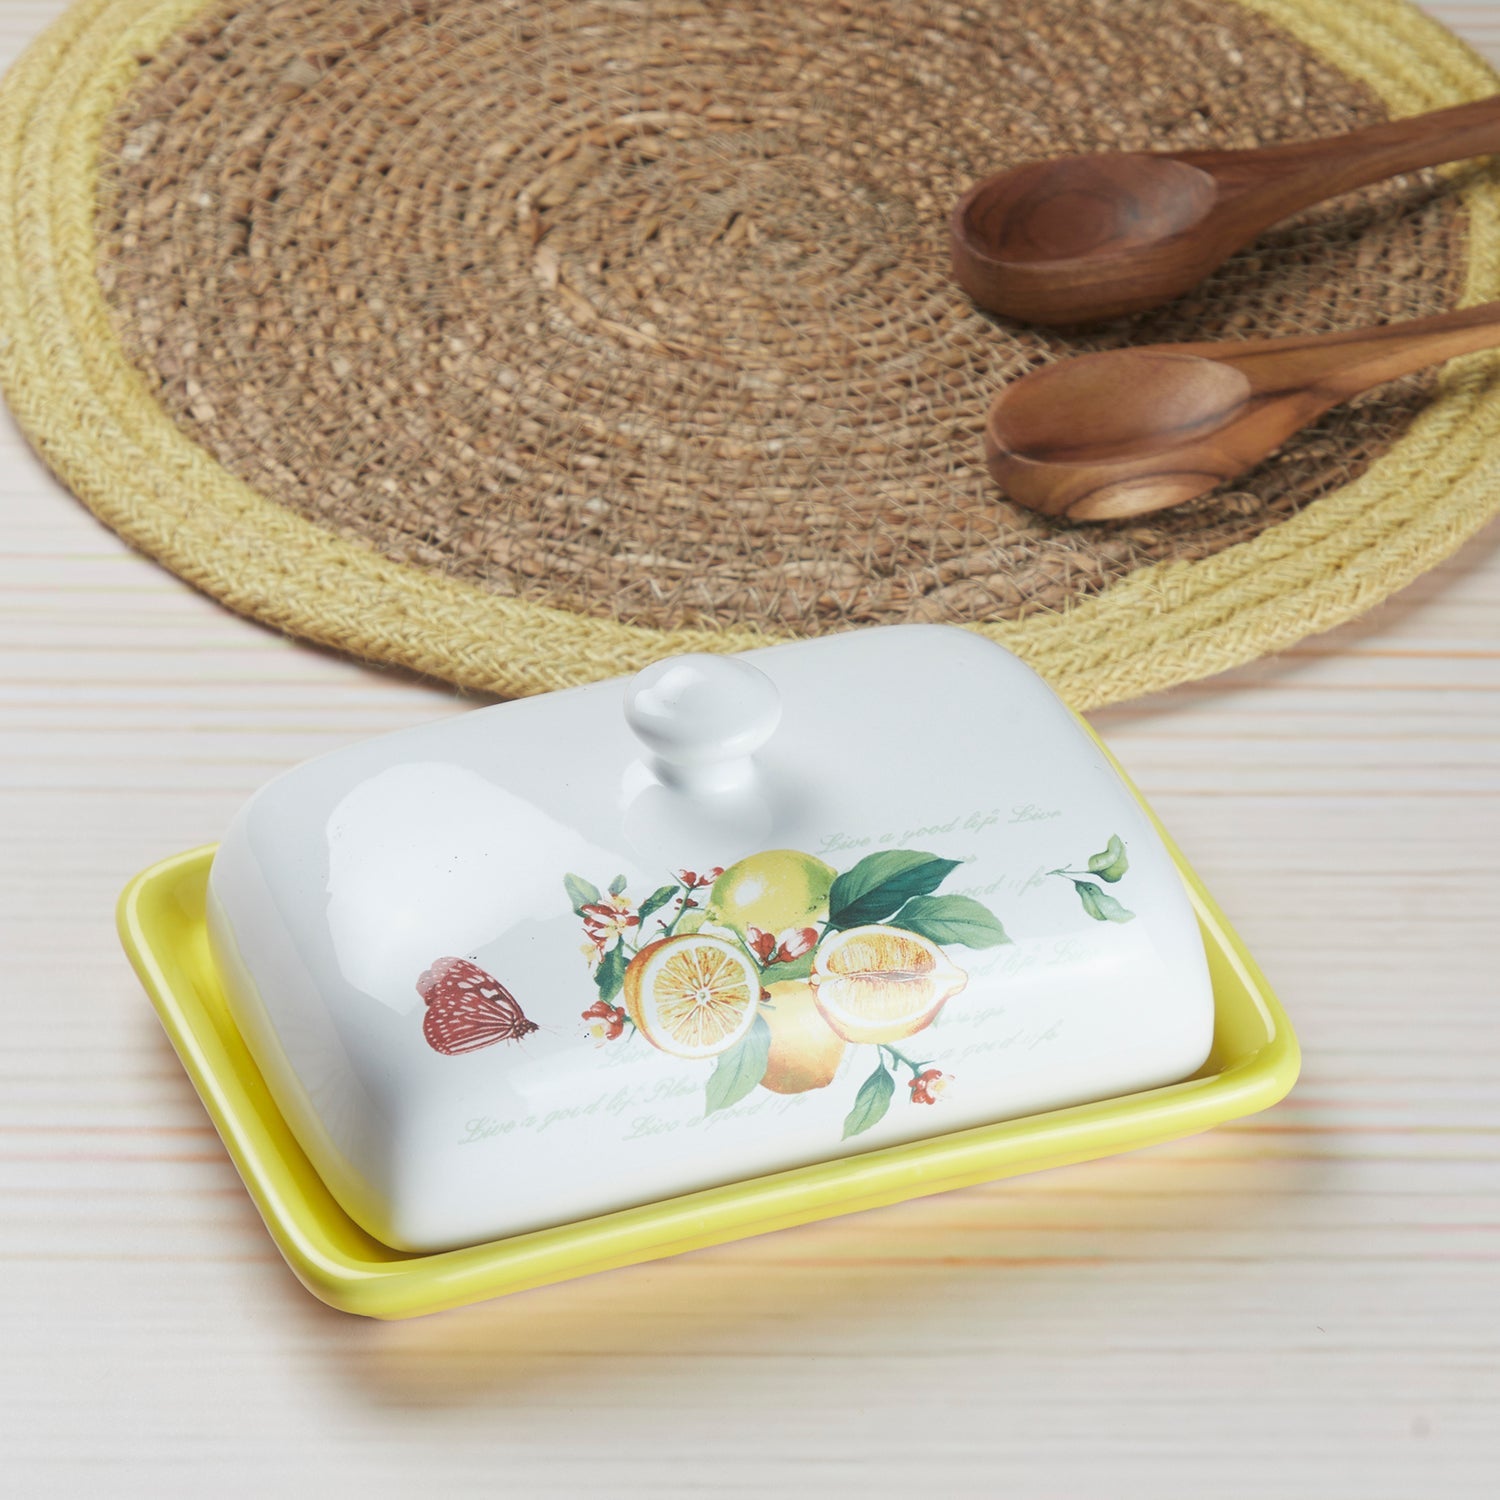 Ceramic Butter Dish Tray with Lid with 250g (10270)